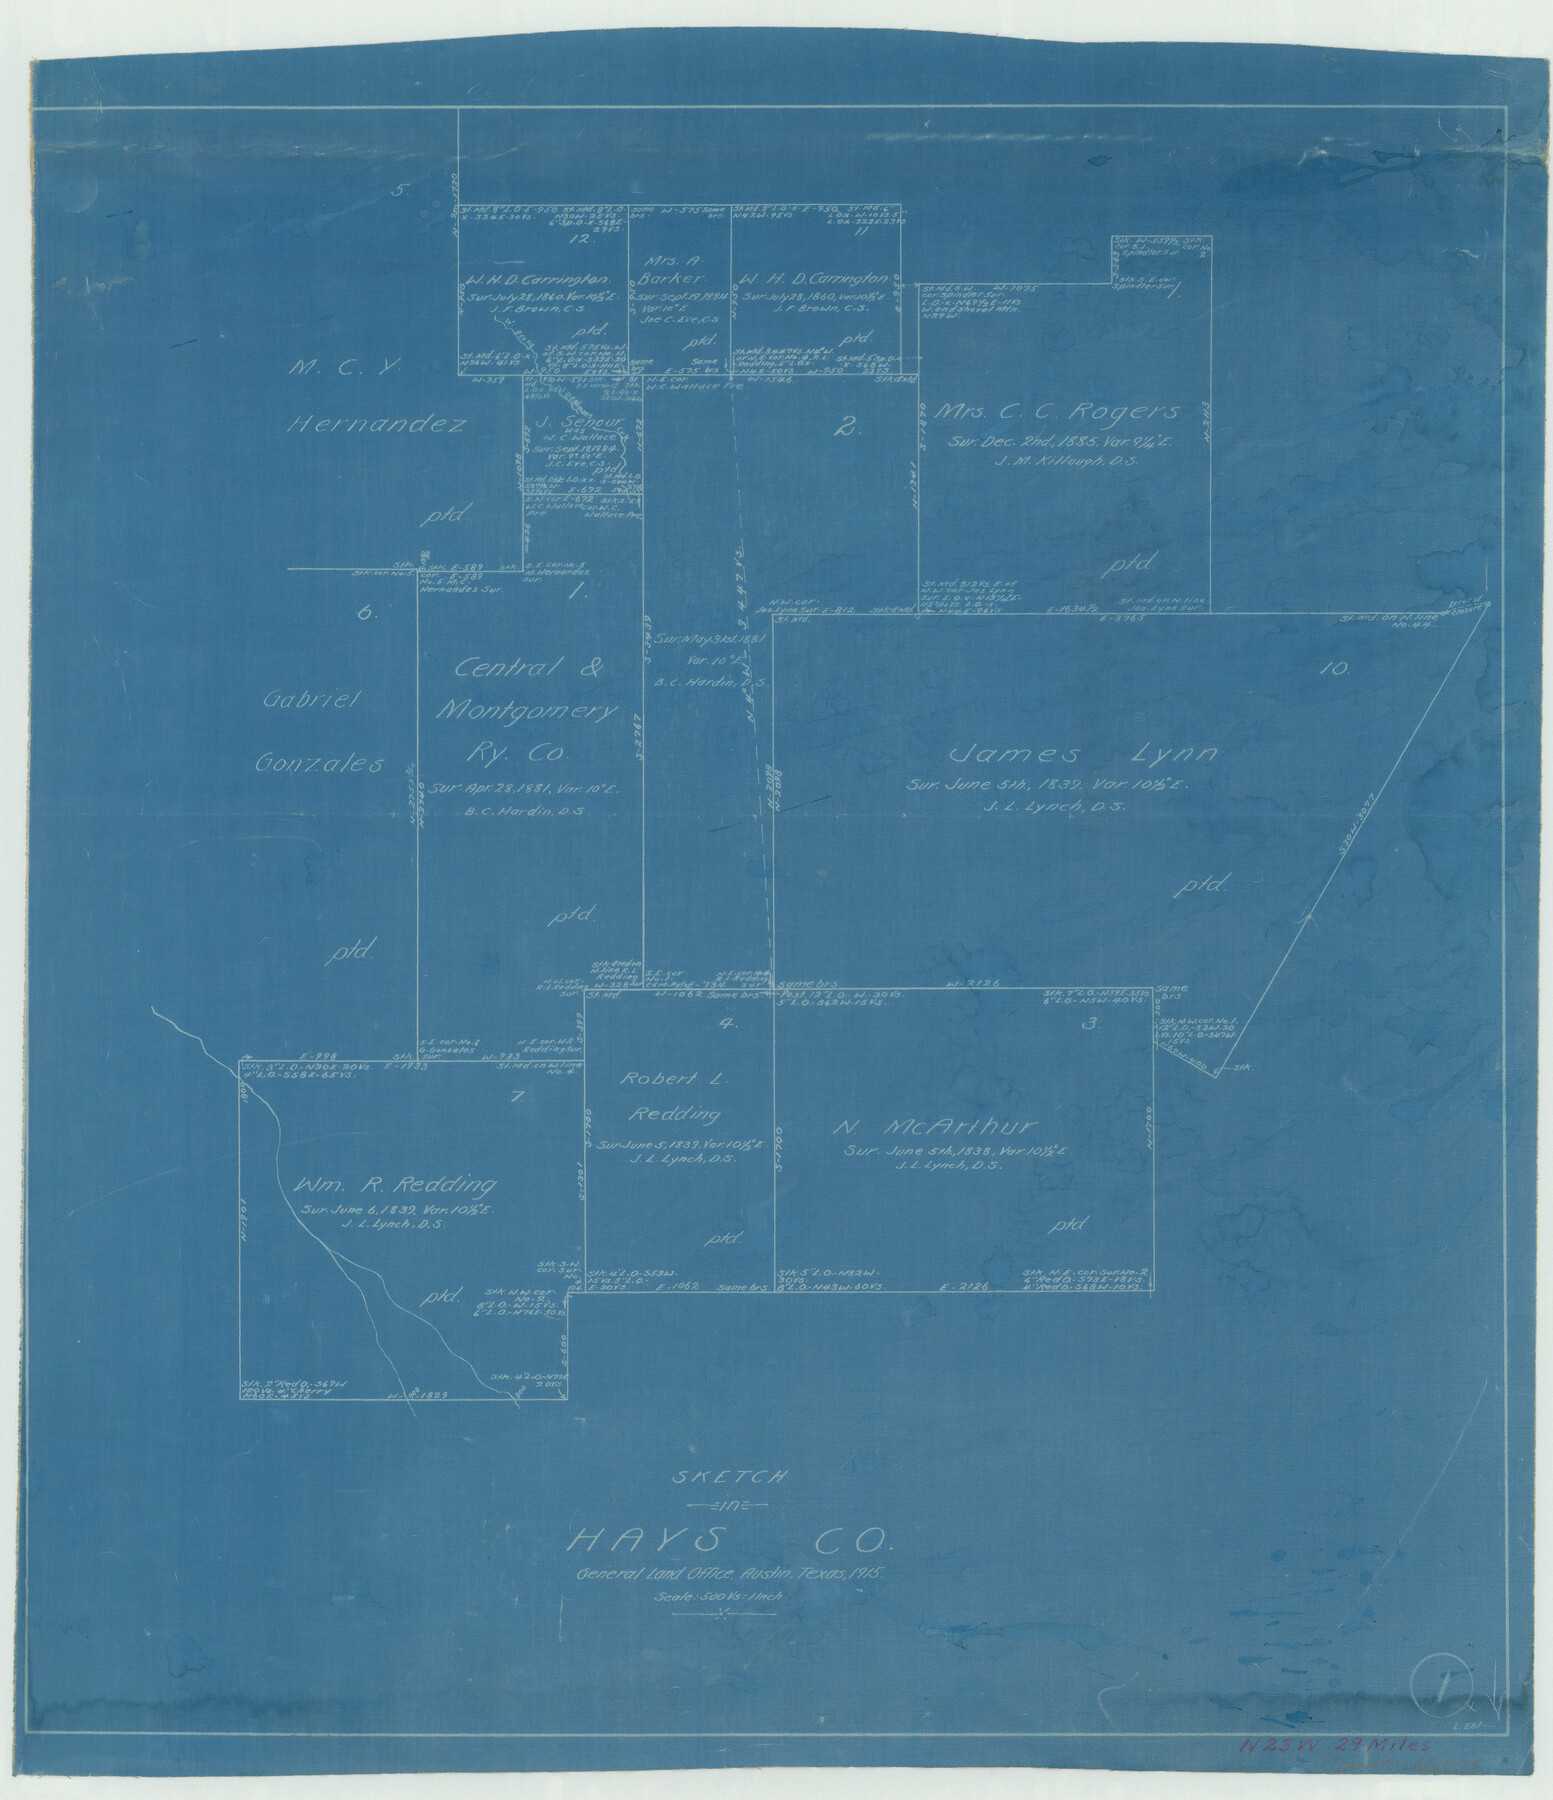 66075, Hays County Working Sketch 1, General Map Collection